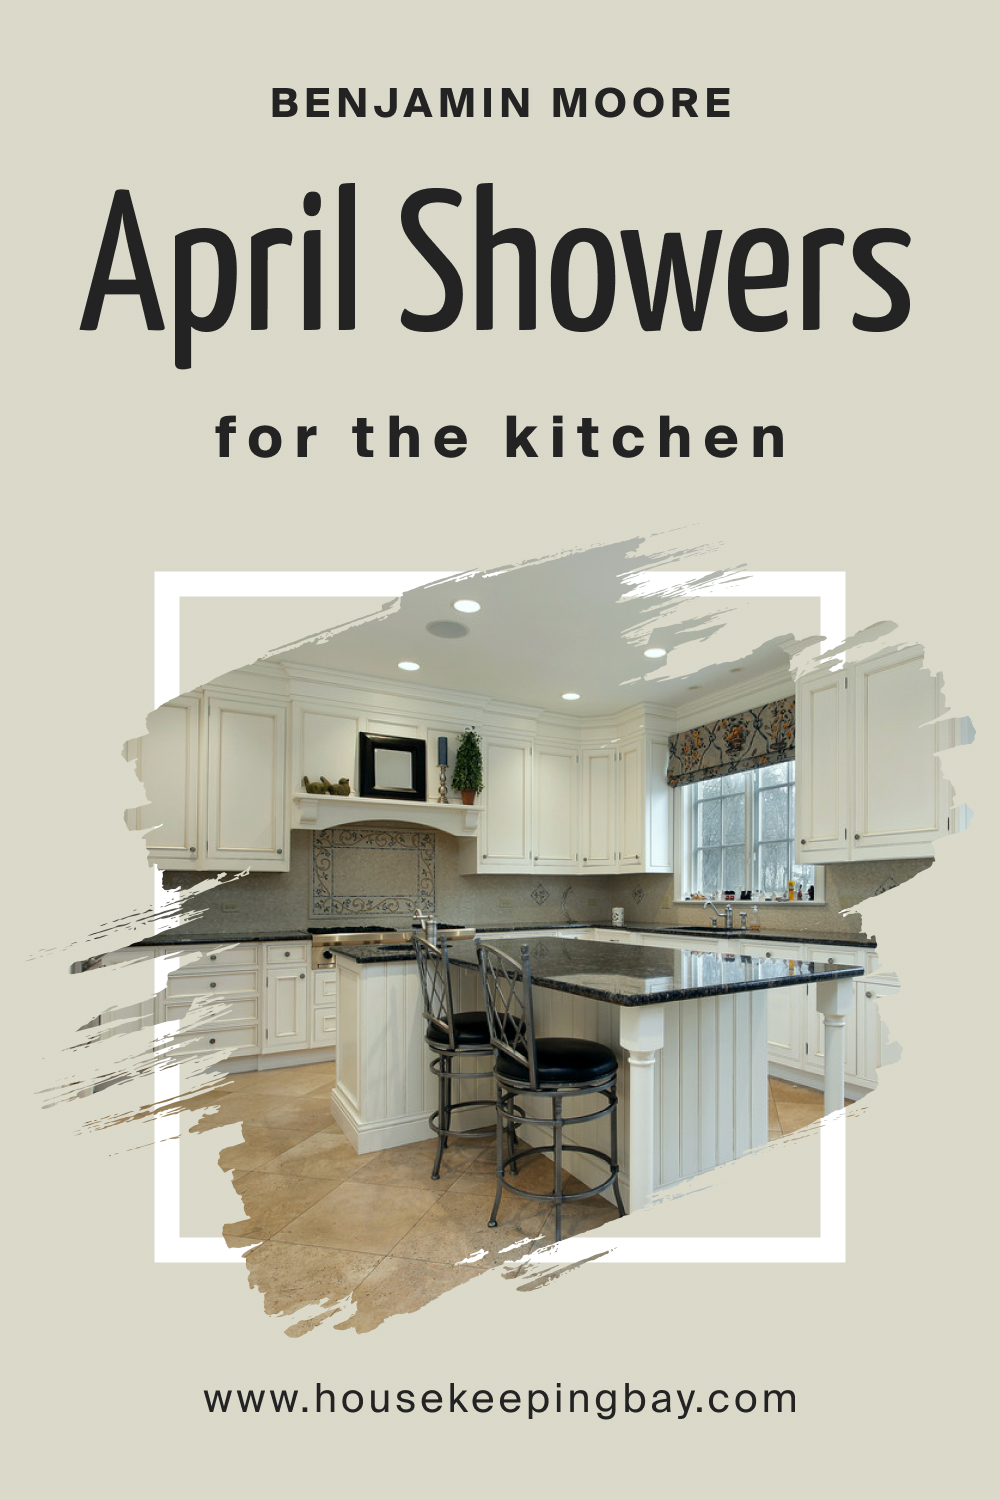 How to Use BM April Showers 1507 in the Kitchen?